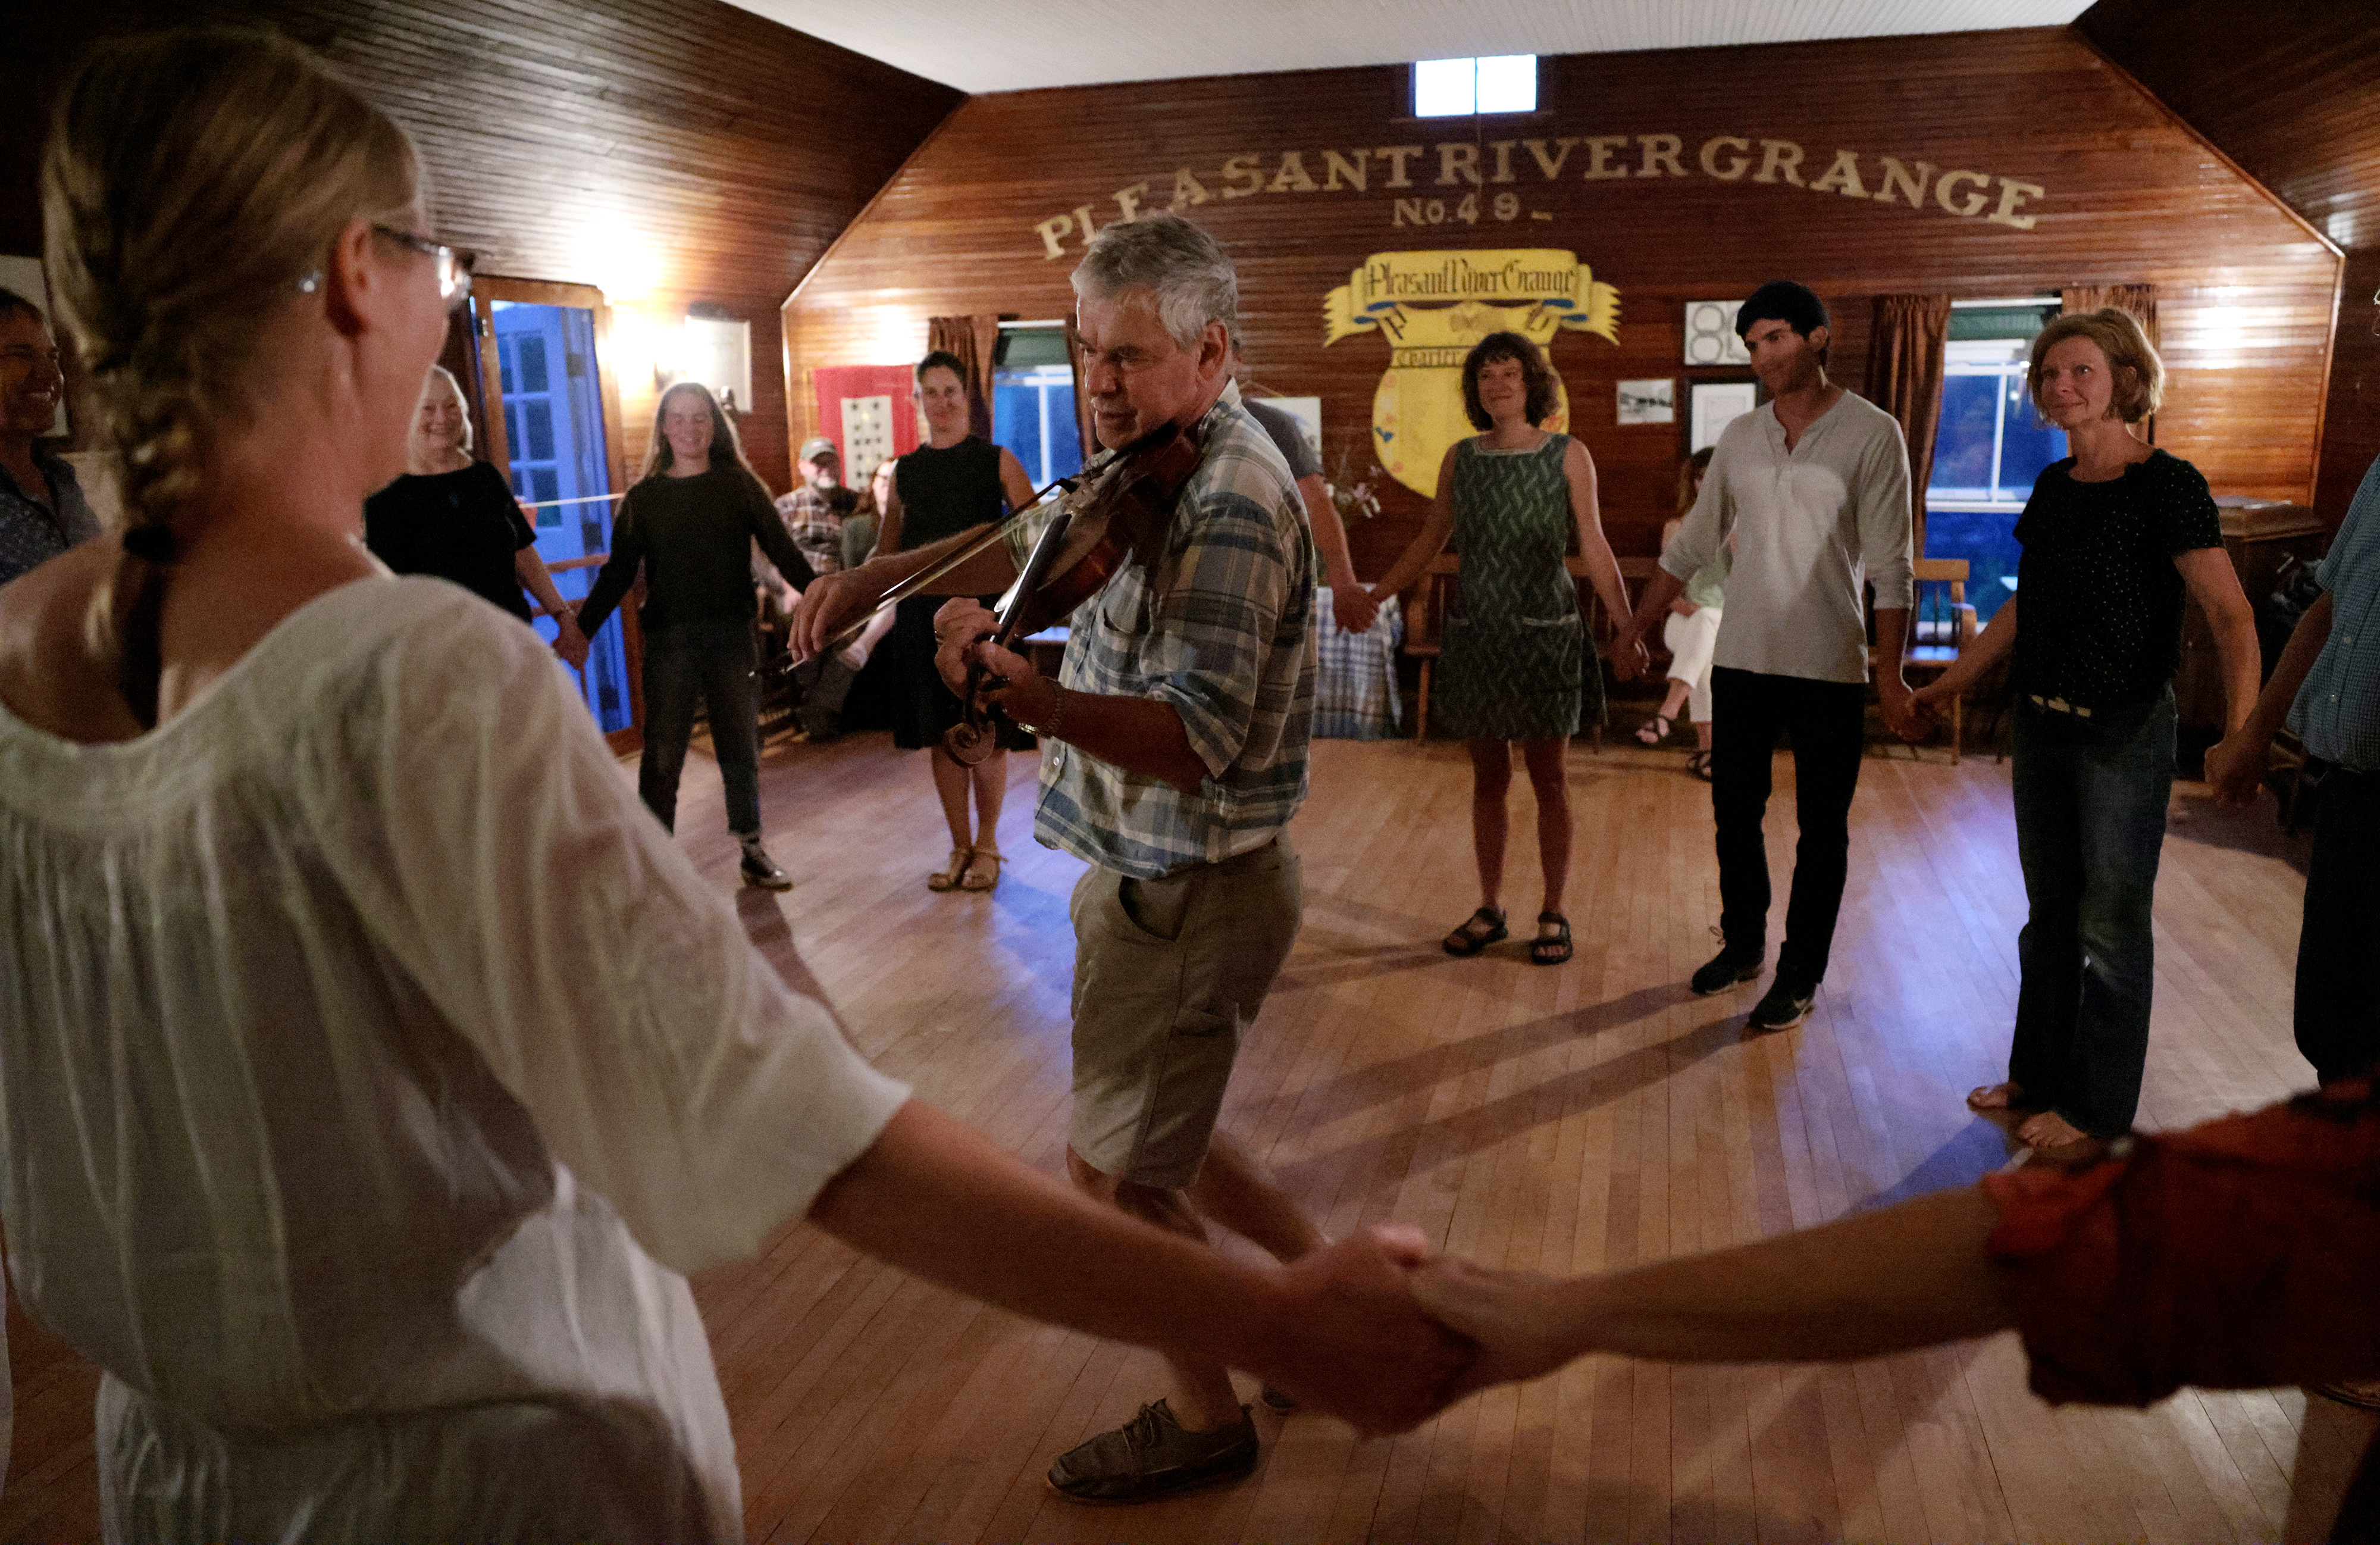 The Greg Dorr Band performed at the Pleasant River Grange in Vinalhaven on July 24. The historic grange hall was once used as housing for granite quarry workers.